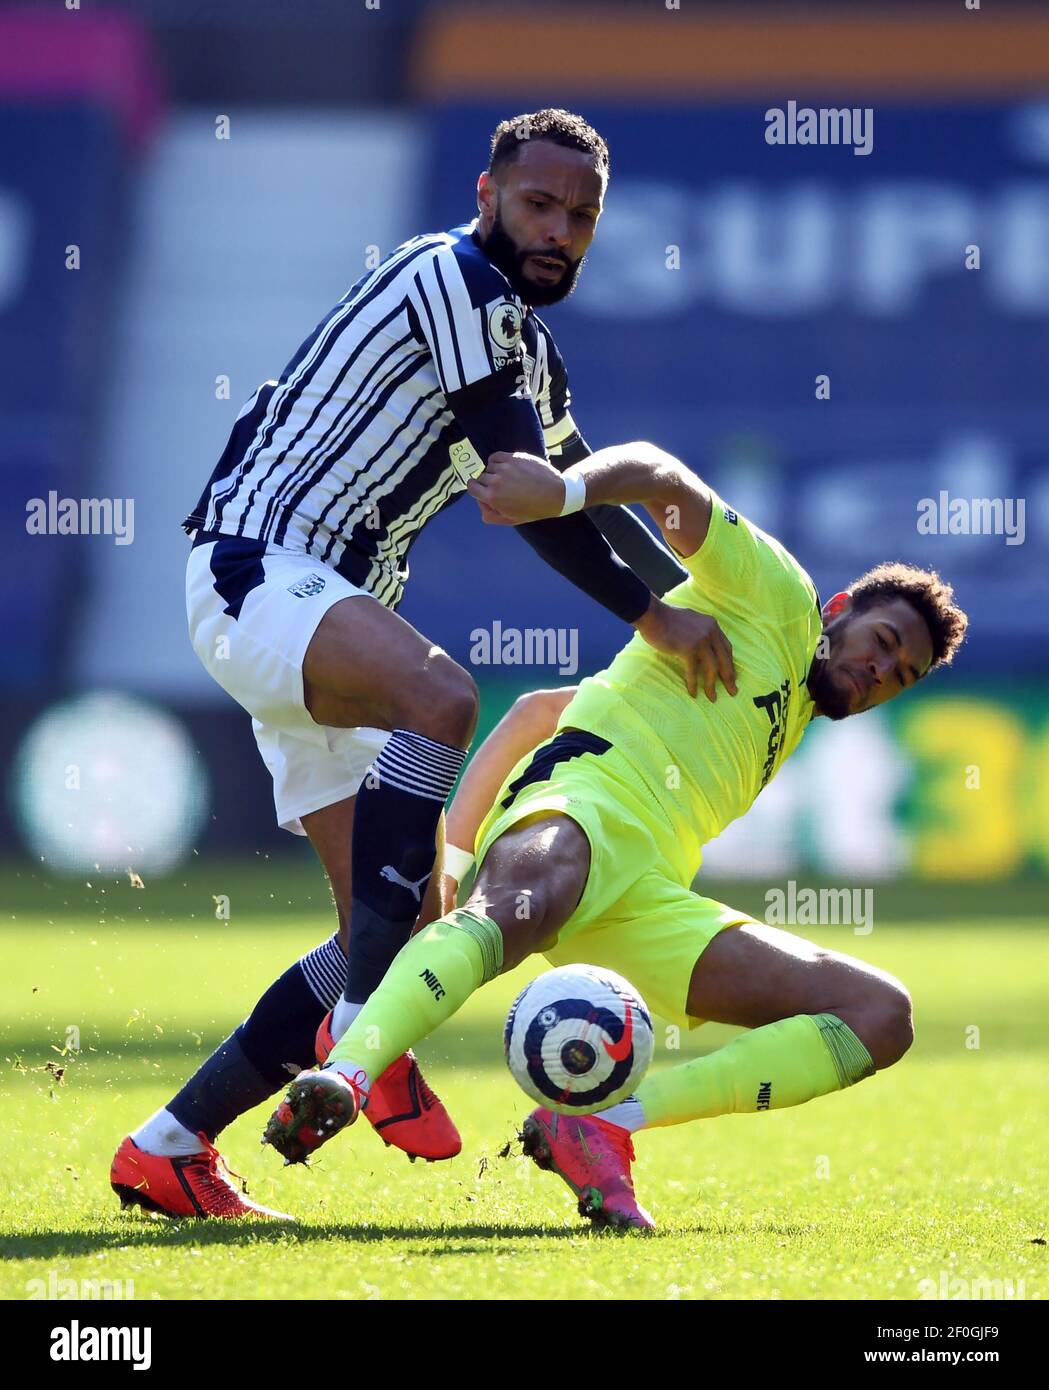 West Bromwich Albion's Kyle Bartley (left) and Newcastle United's Joelinton battle for the ball during the Premier League match at The Hawthorns, West Bromwich. Picture date: Sunday March 7, 2021. Stock Photo